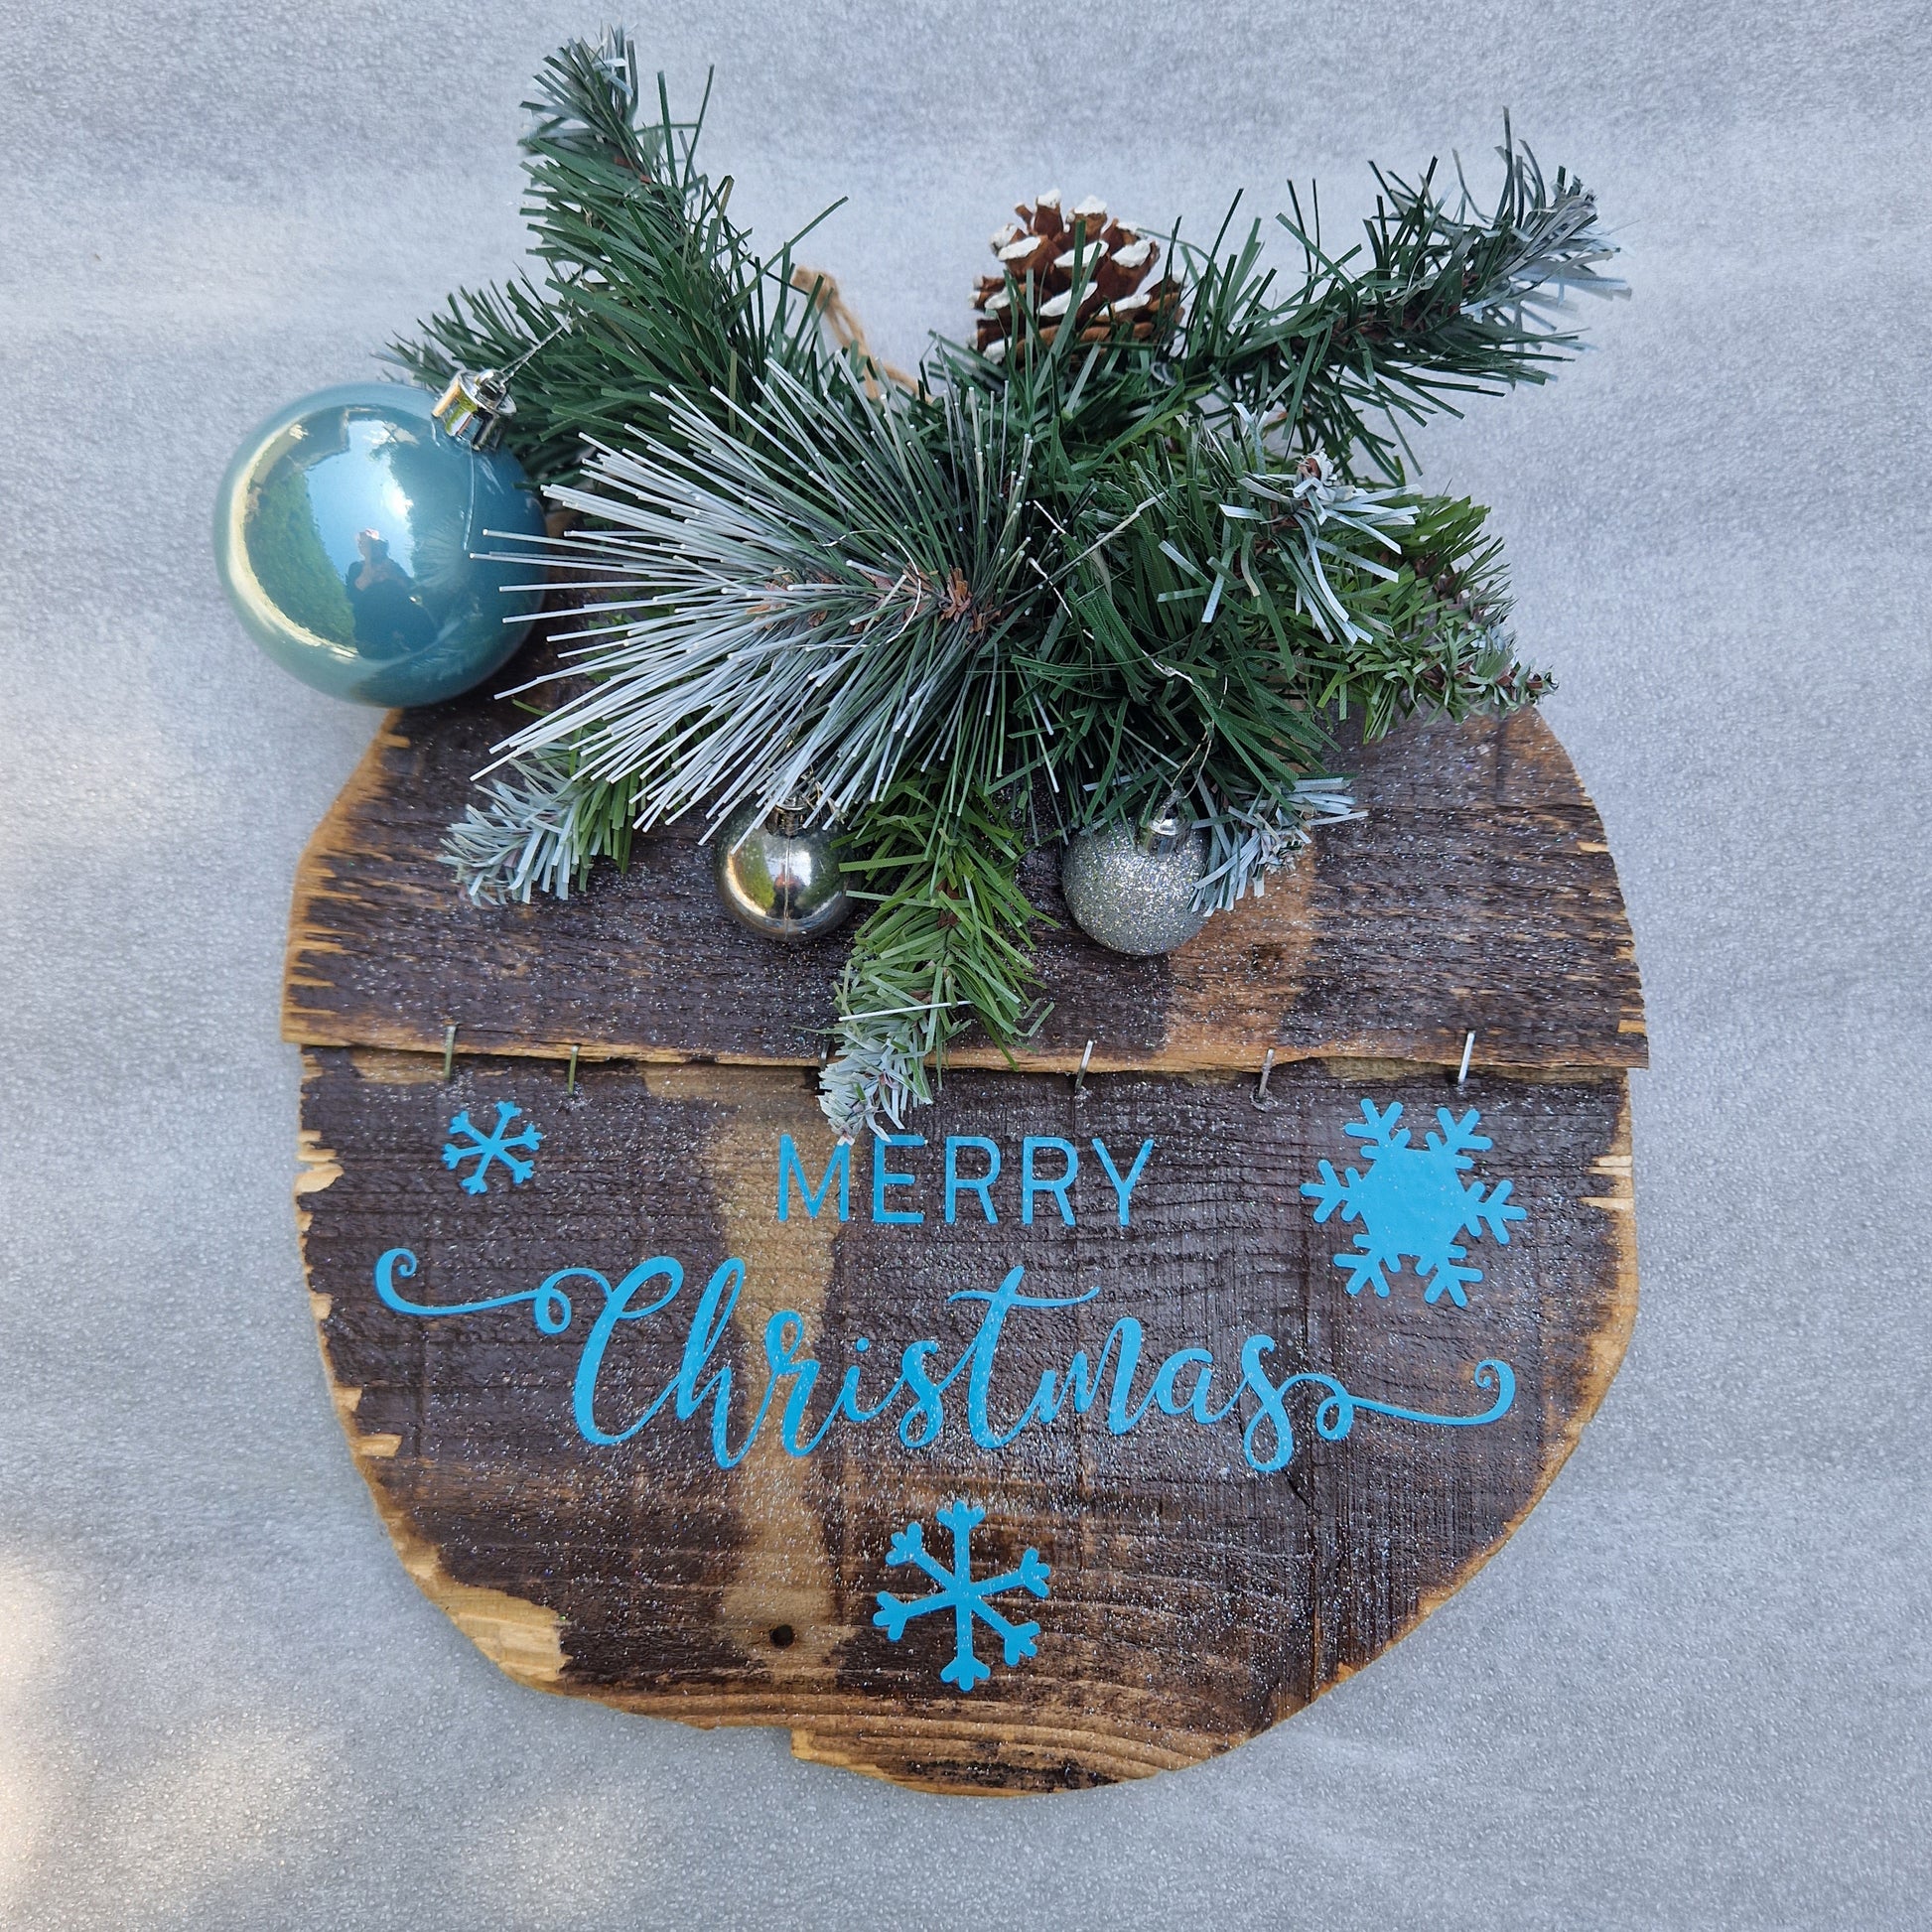 merry christmas wooden sign rustic with silver and blue christmas decorations